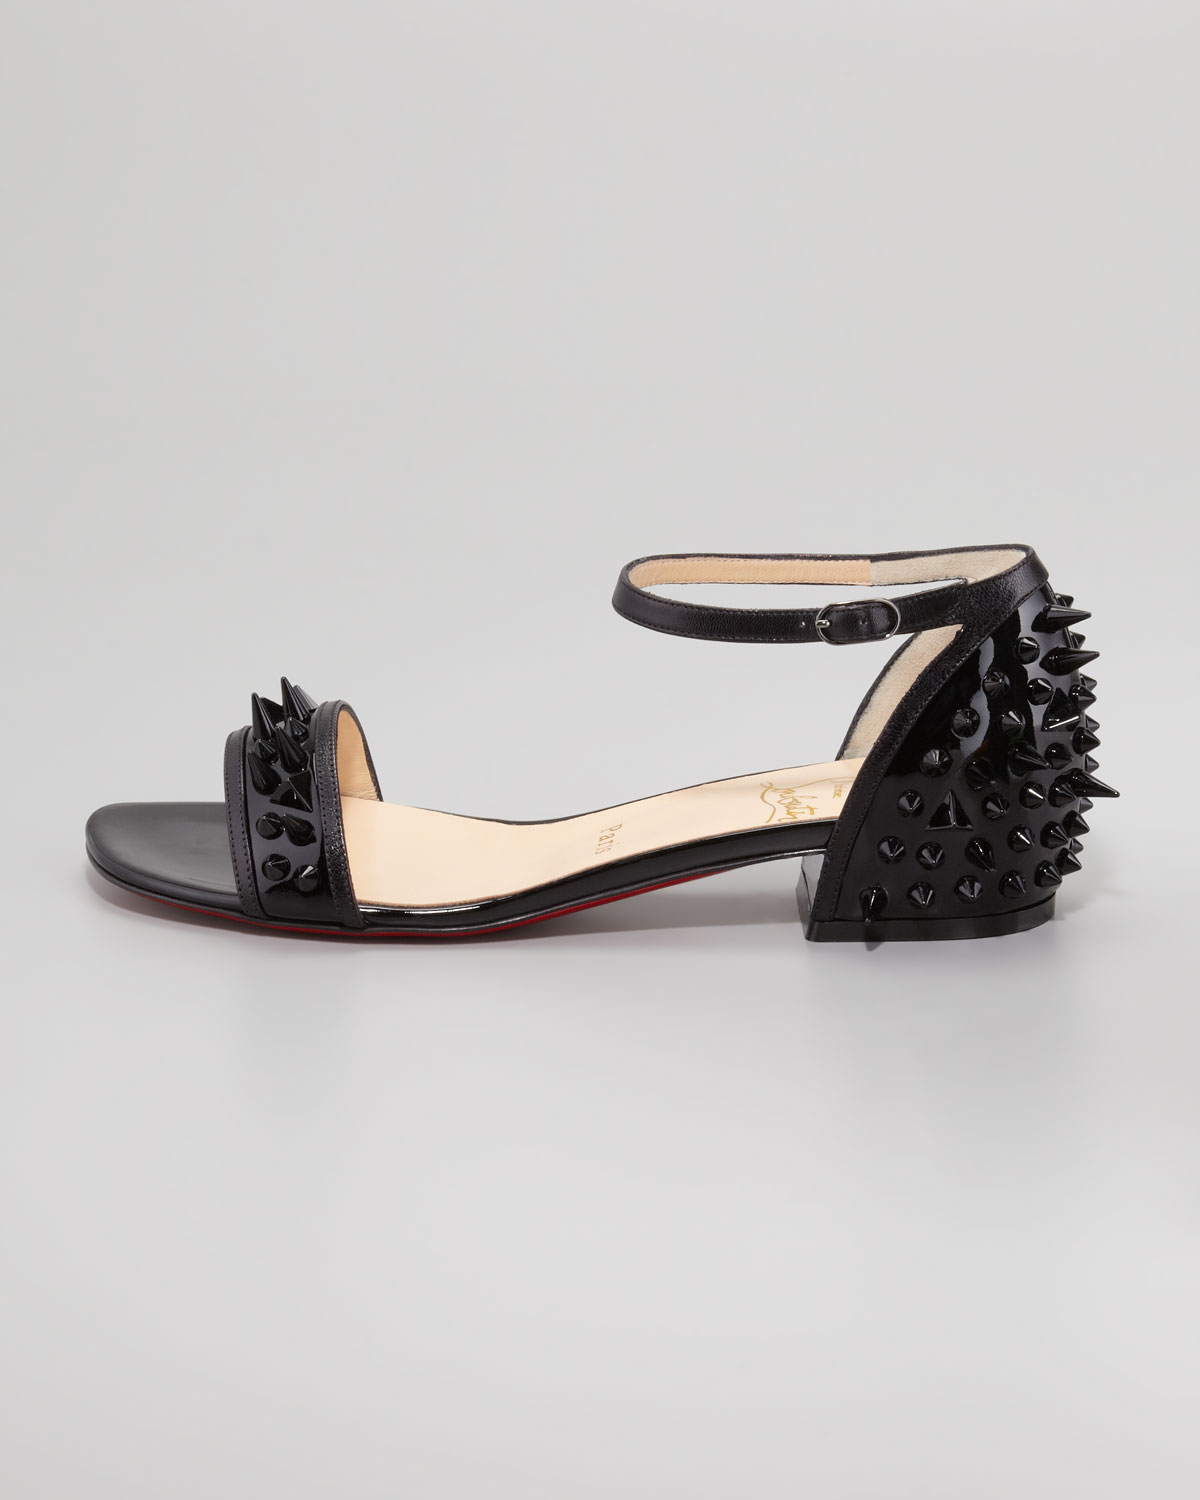 Christian louboutin Druide Spiked Patent Flat Sandal in Black | Lyst  